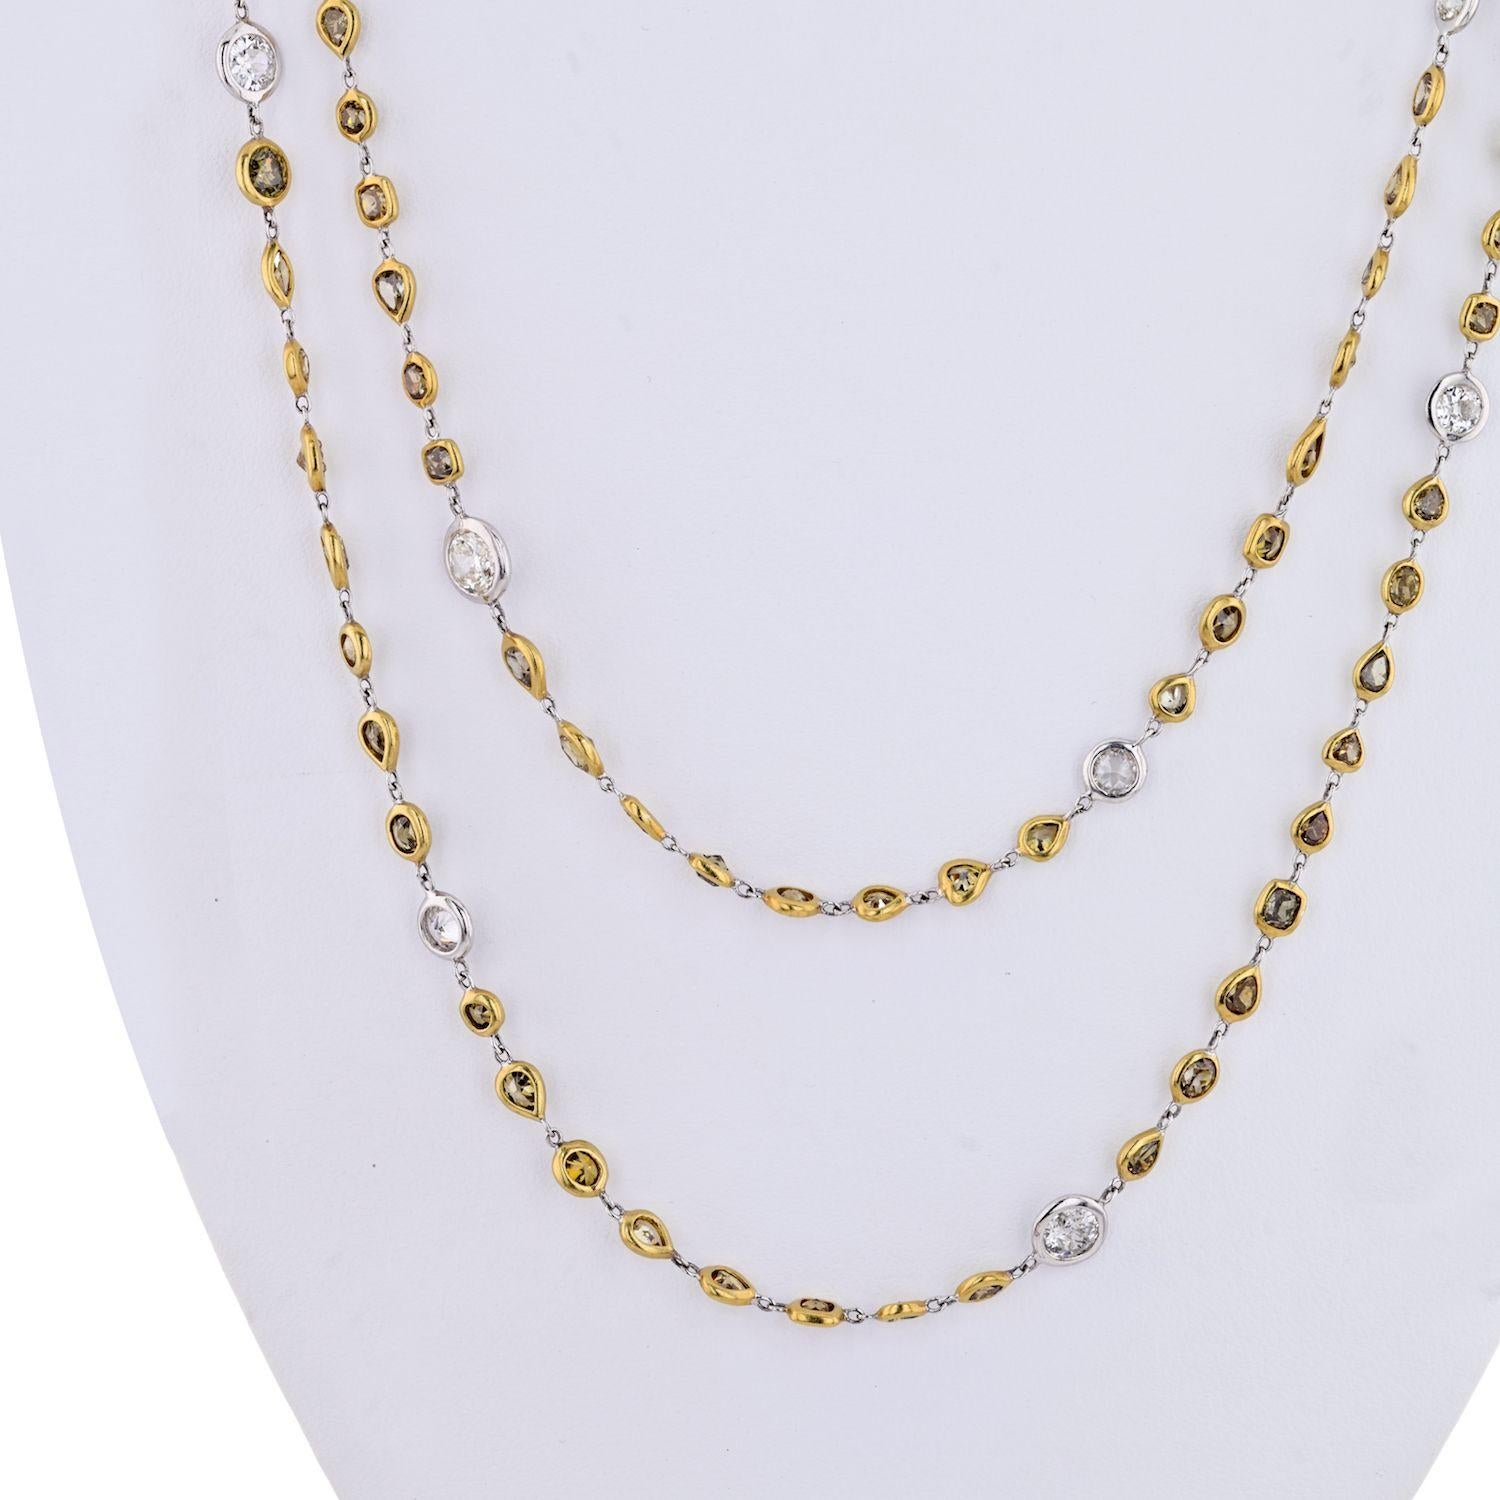 Handmade diamond by the yard crafted with our own jewelers. 
56 inches long that you can wrap around your neck 2-3 times. 
Lovely fancy shapes in yellow and white diamonds. 
Natural fancy diamonds, and natural white diamonds. 
All of VS-SI clarity,